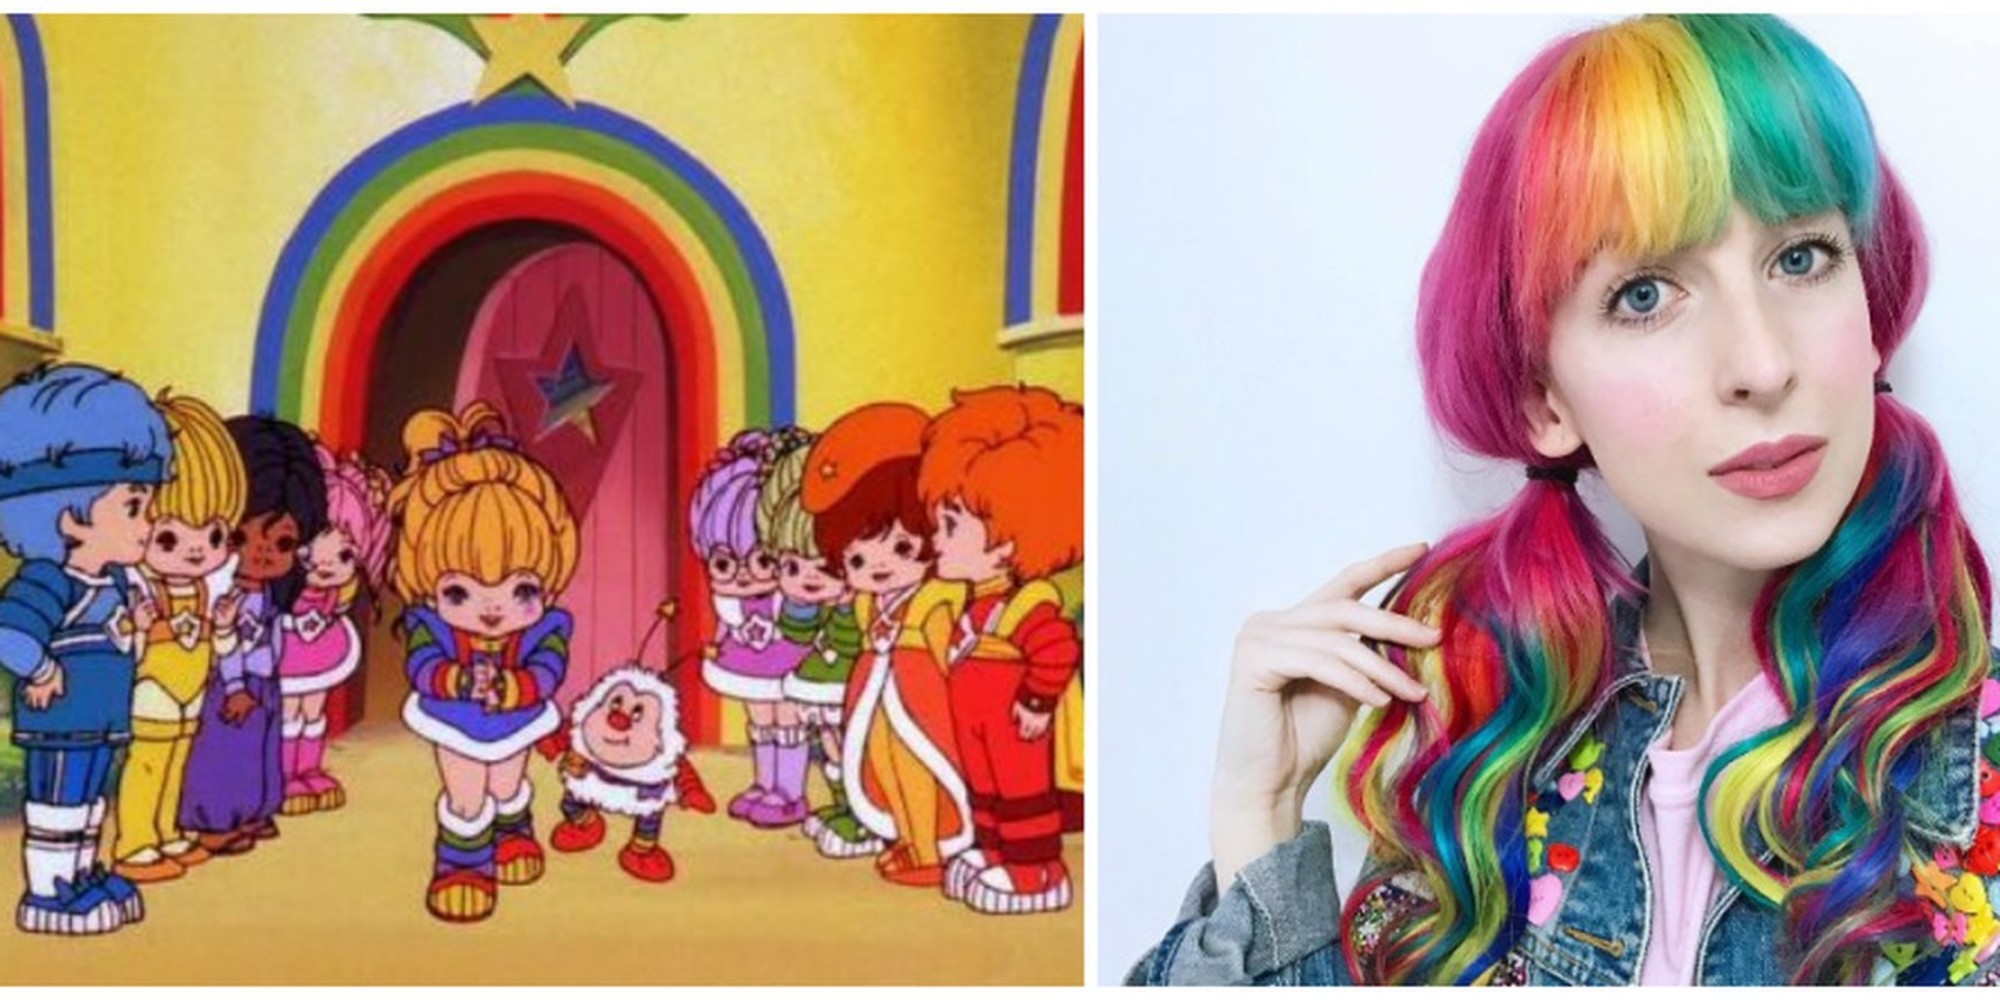 Move Over Rainbow Bright! Lisa Frank Hair Is An 80's/90's Trend Revival